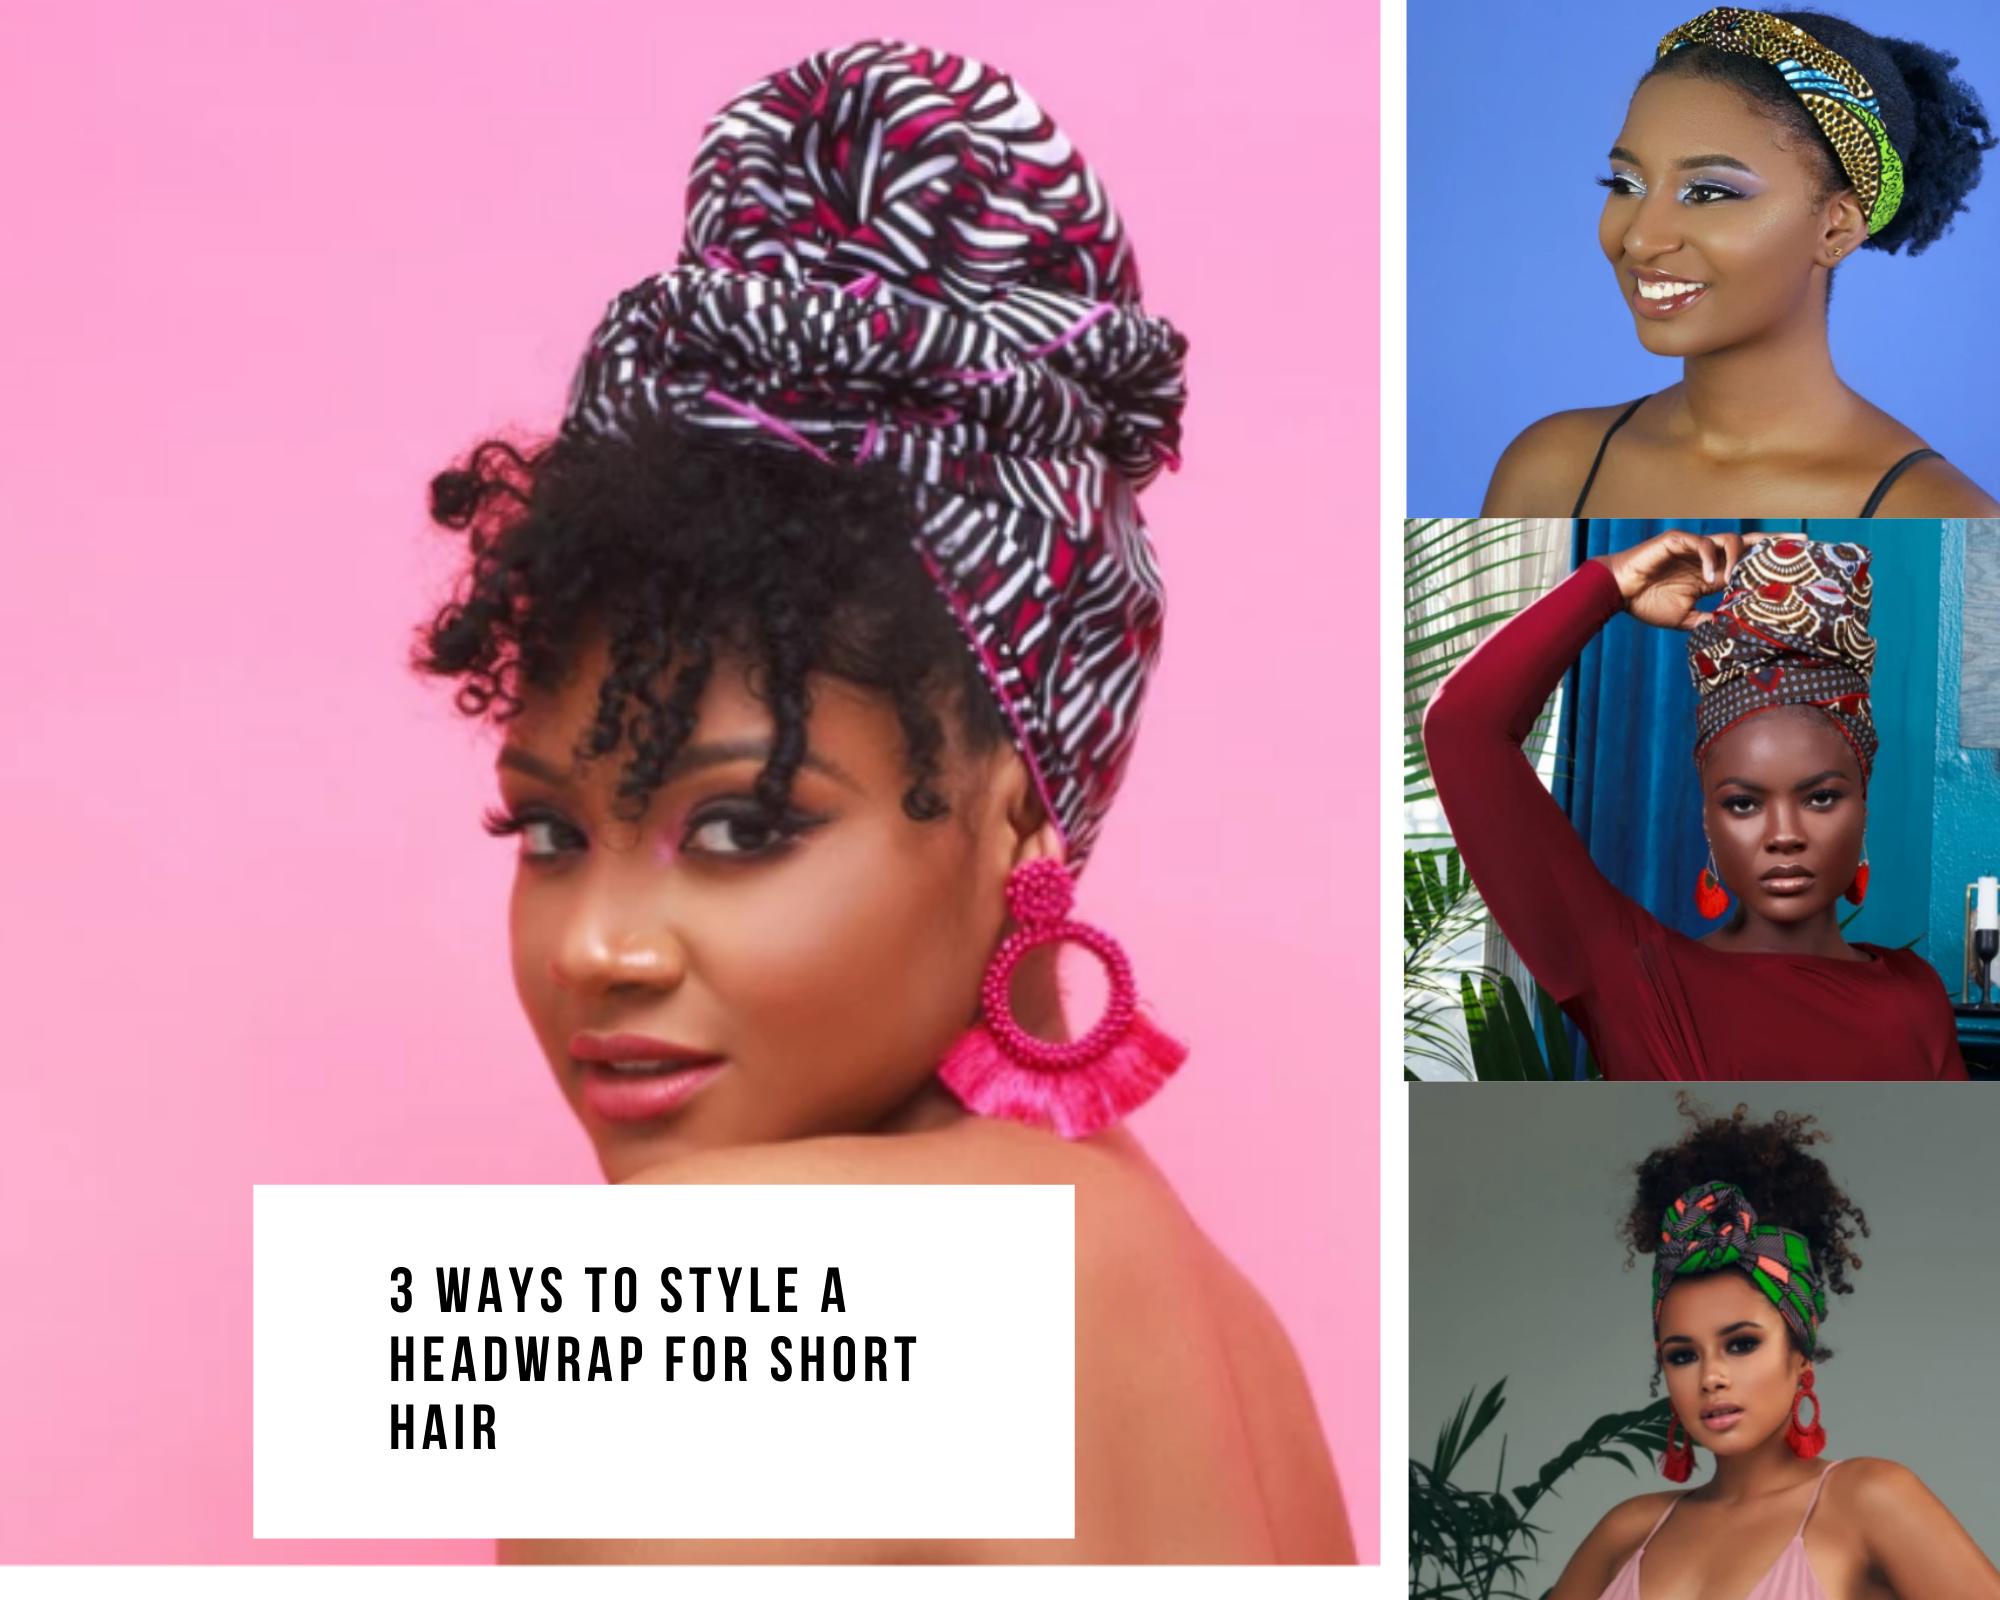 3 Ways To Style A Headwrap For Short Hair